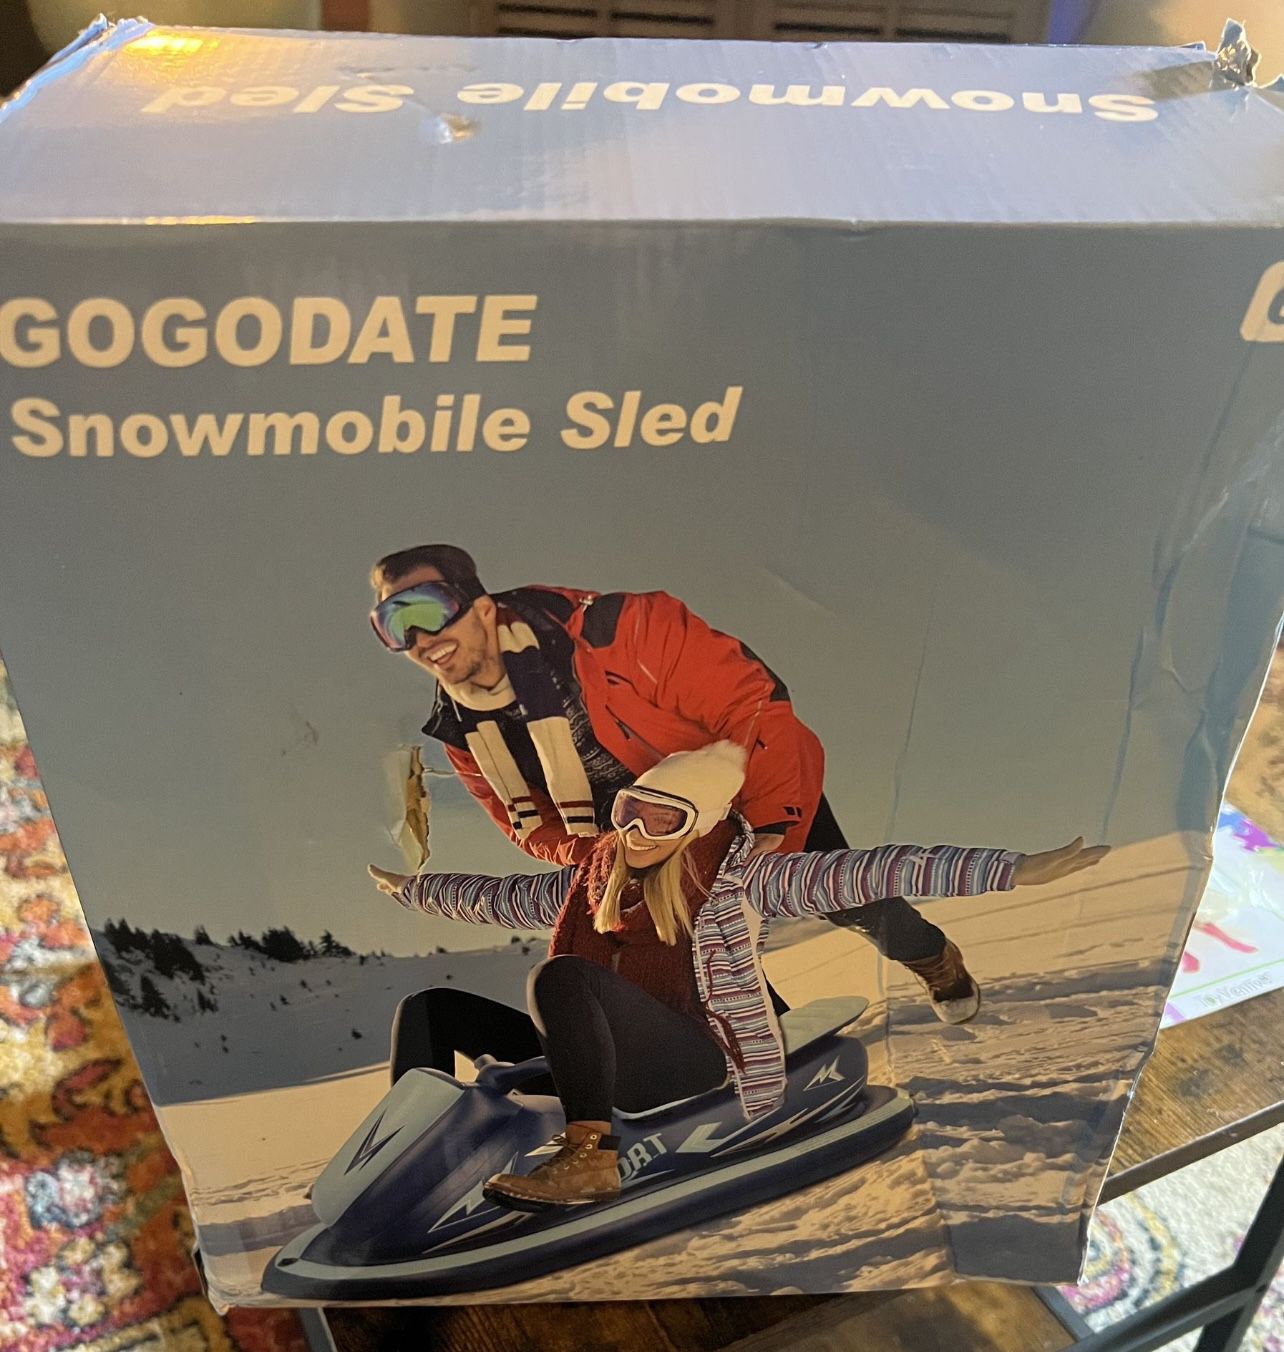 New Snowmobile Sled Inflatable, Adults, Blue  GOGODATE Snowmobile Sled Inflatable, New 